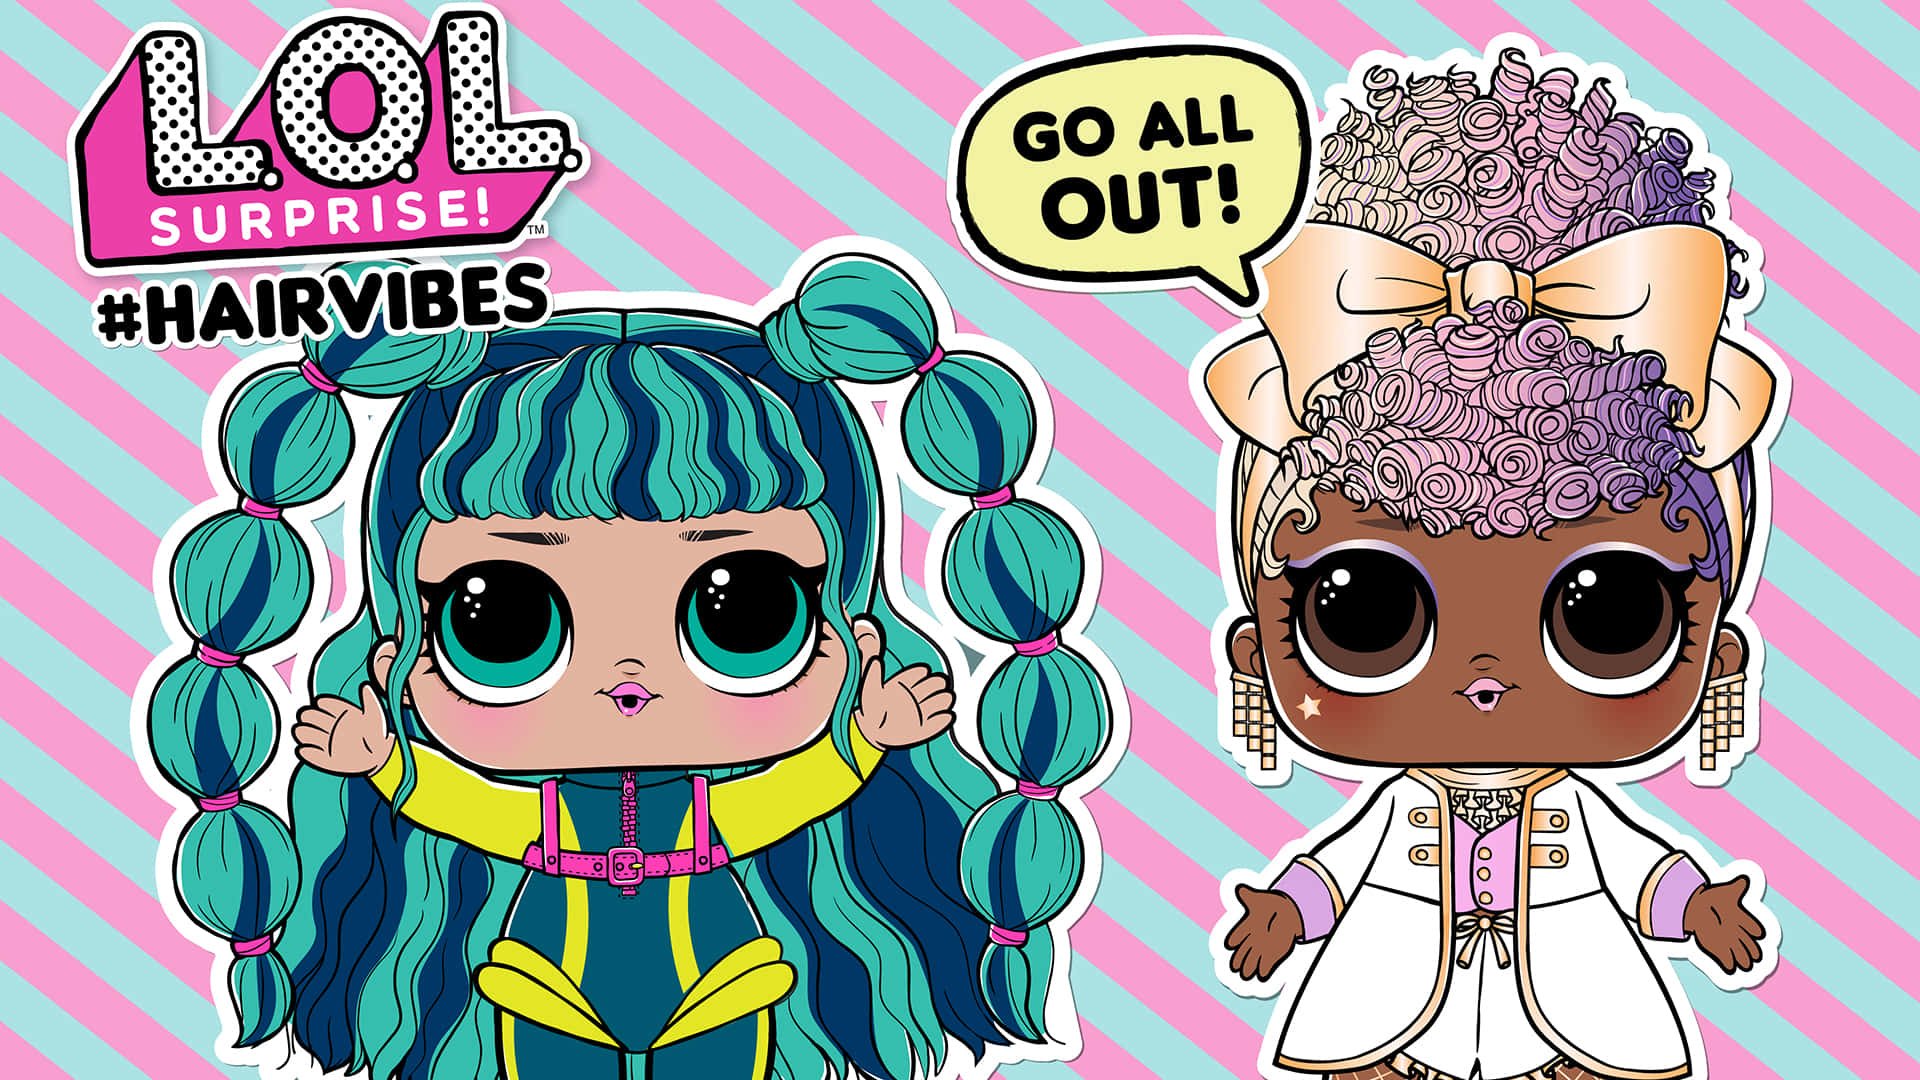 Strengthen friendships with the new LOL Surprise dolls!